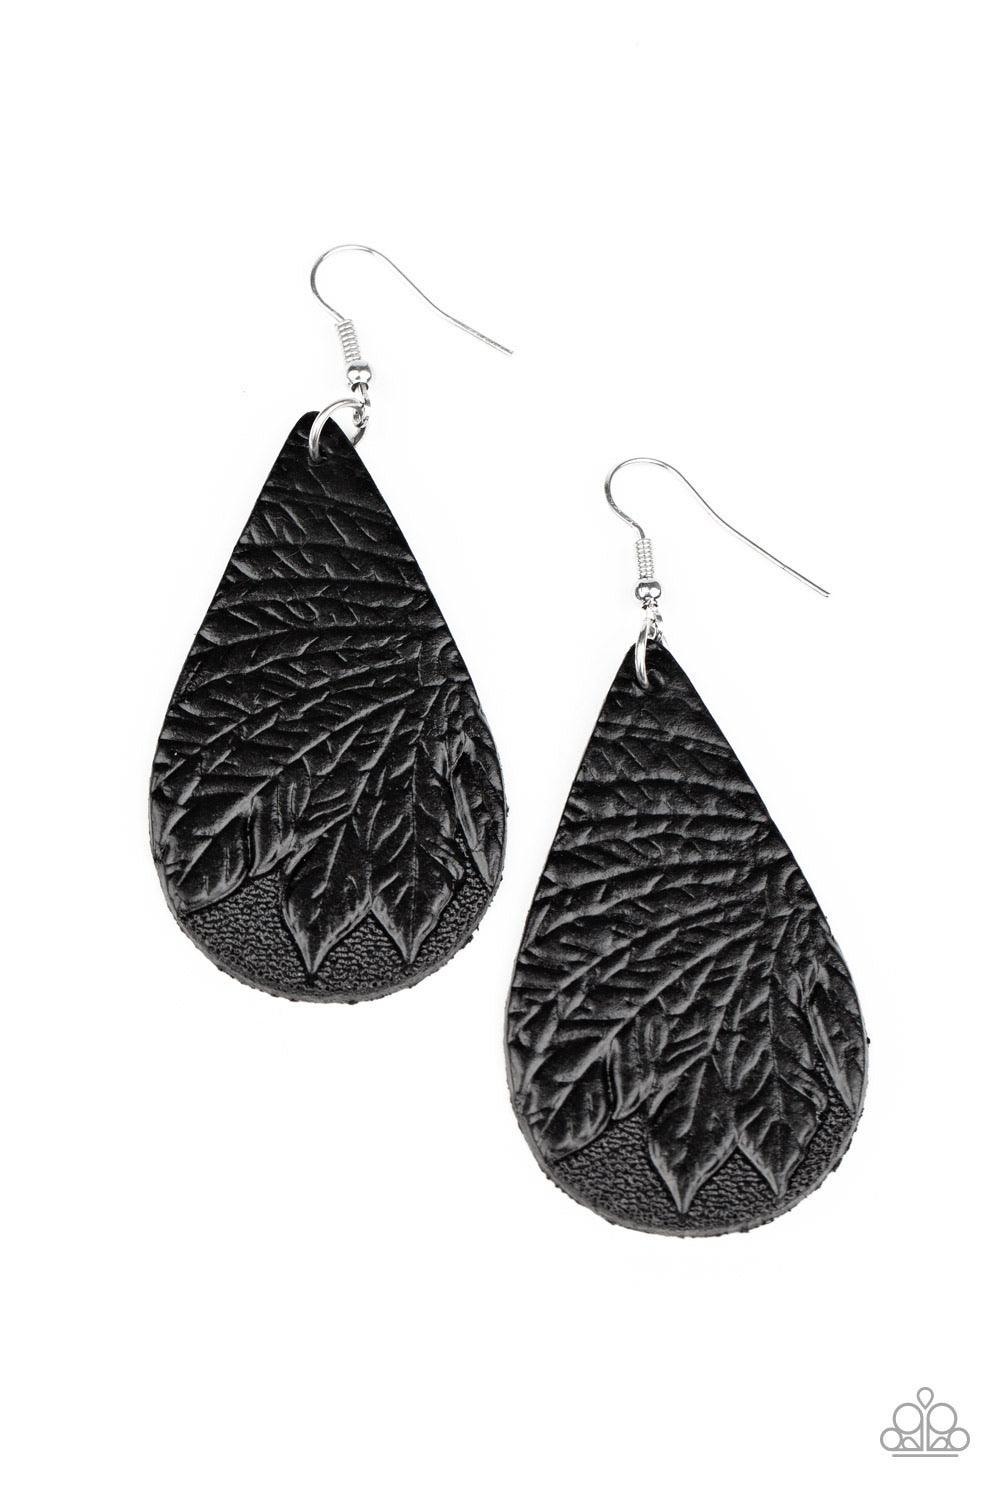 Paparazzi Accessories Everyone Remain PALM! - Black Embossed in a leafy palm-like pattern, an earthy black leather teardrop swings from the ear for a whimsical look. Earring attaches to a standard fishhook fitting. Sold as one pair of earrings. Jewelry